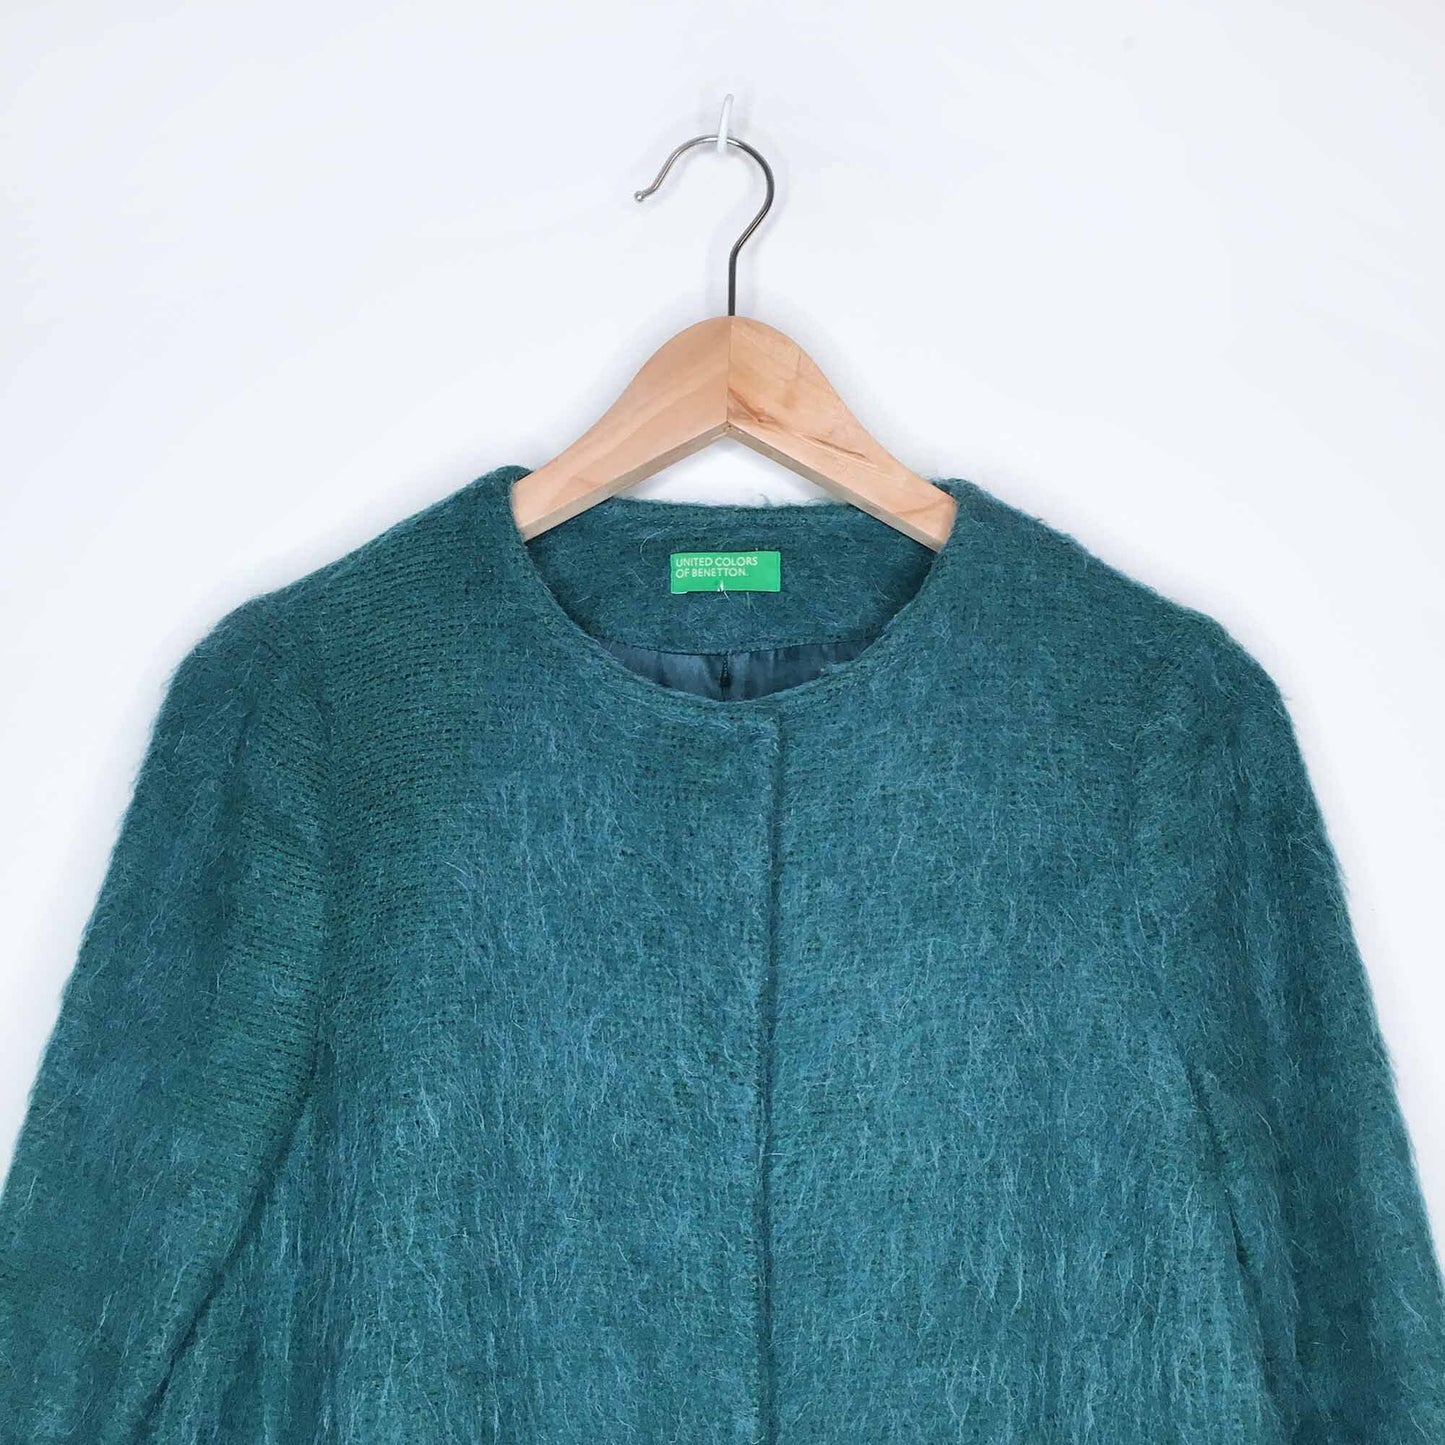 United Colors of Benetton mohair swing coat - size Small